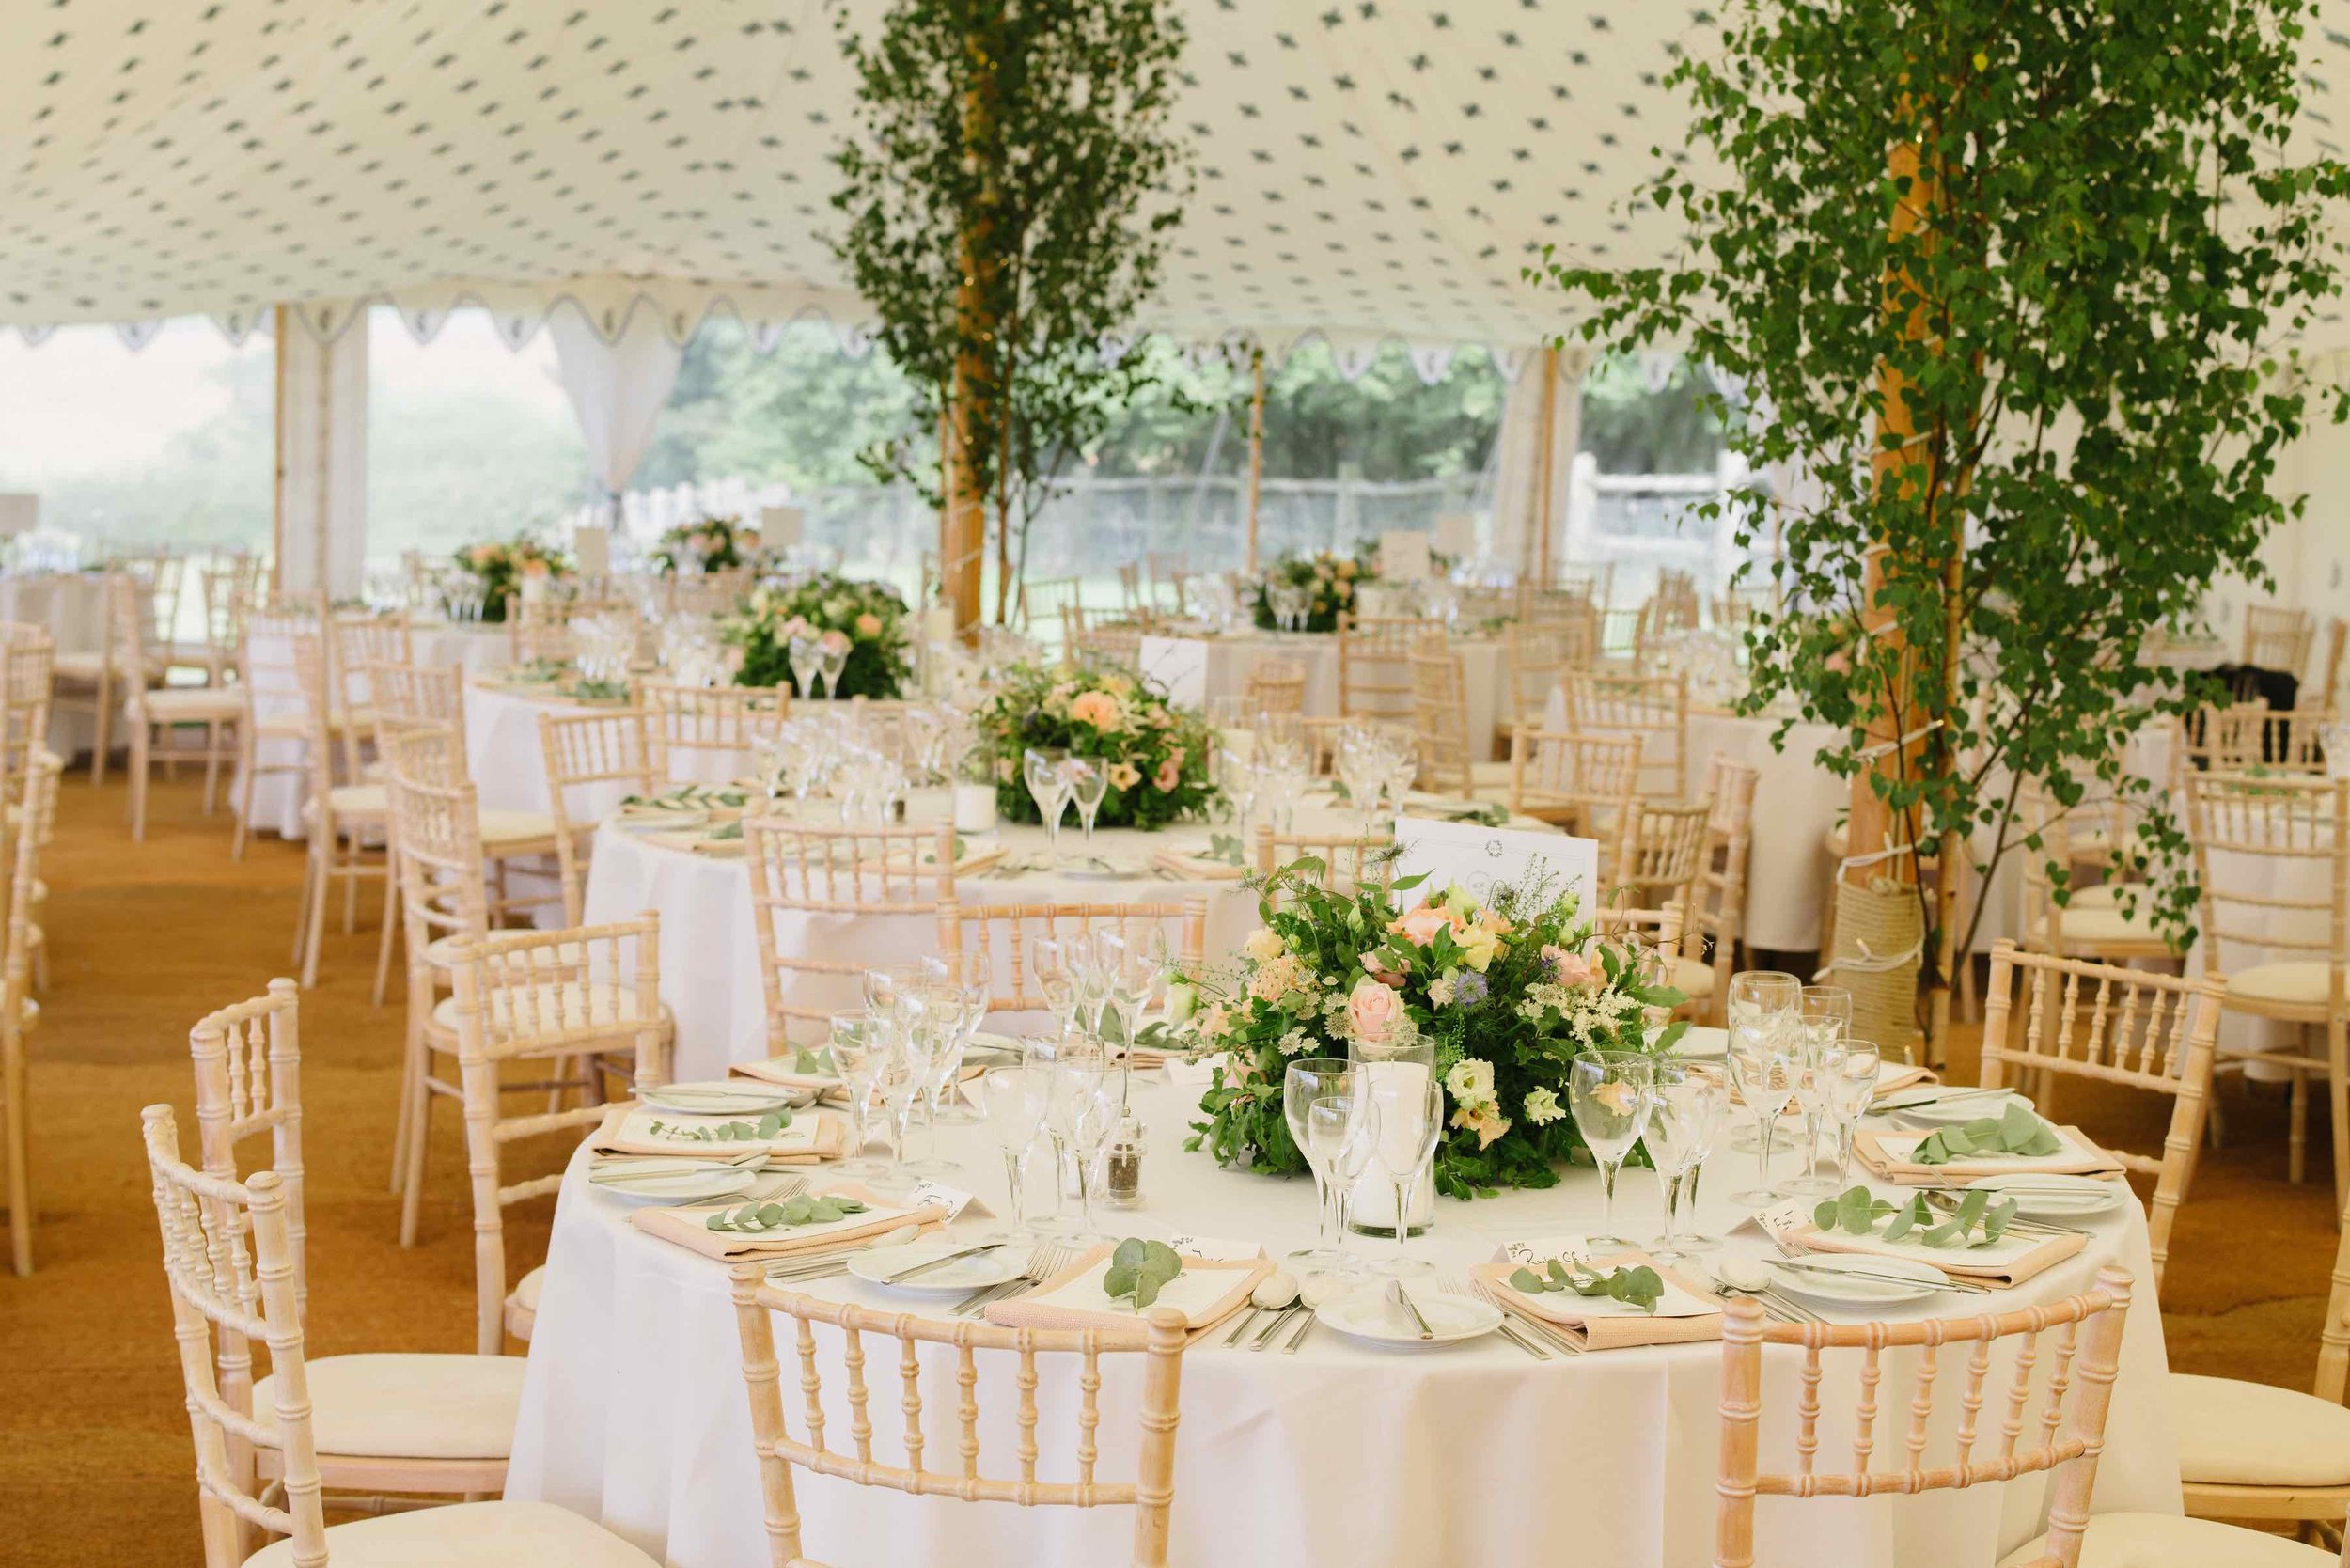 Round Vs Long Dining Tables, What Size Tables For Wedding Planner